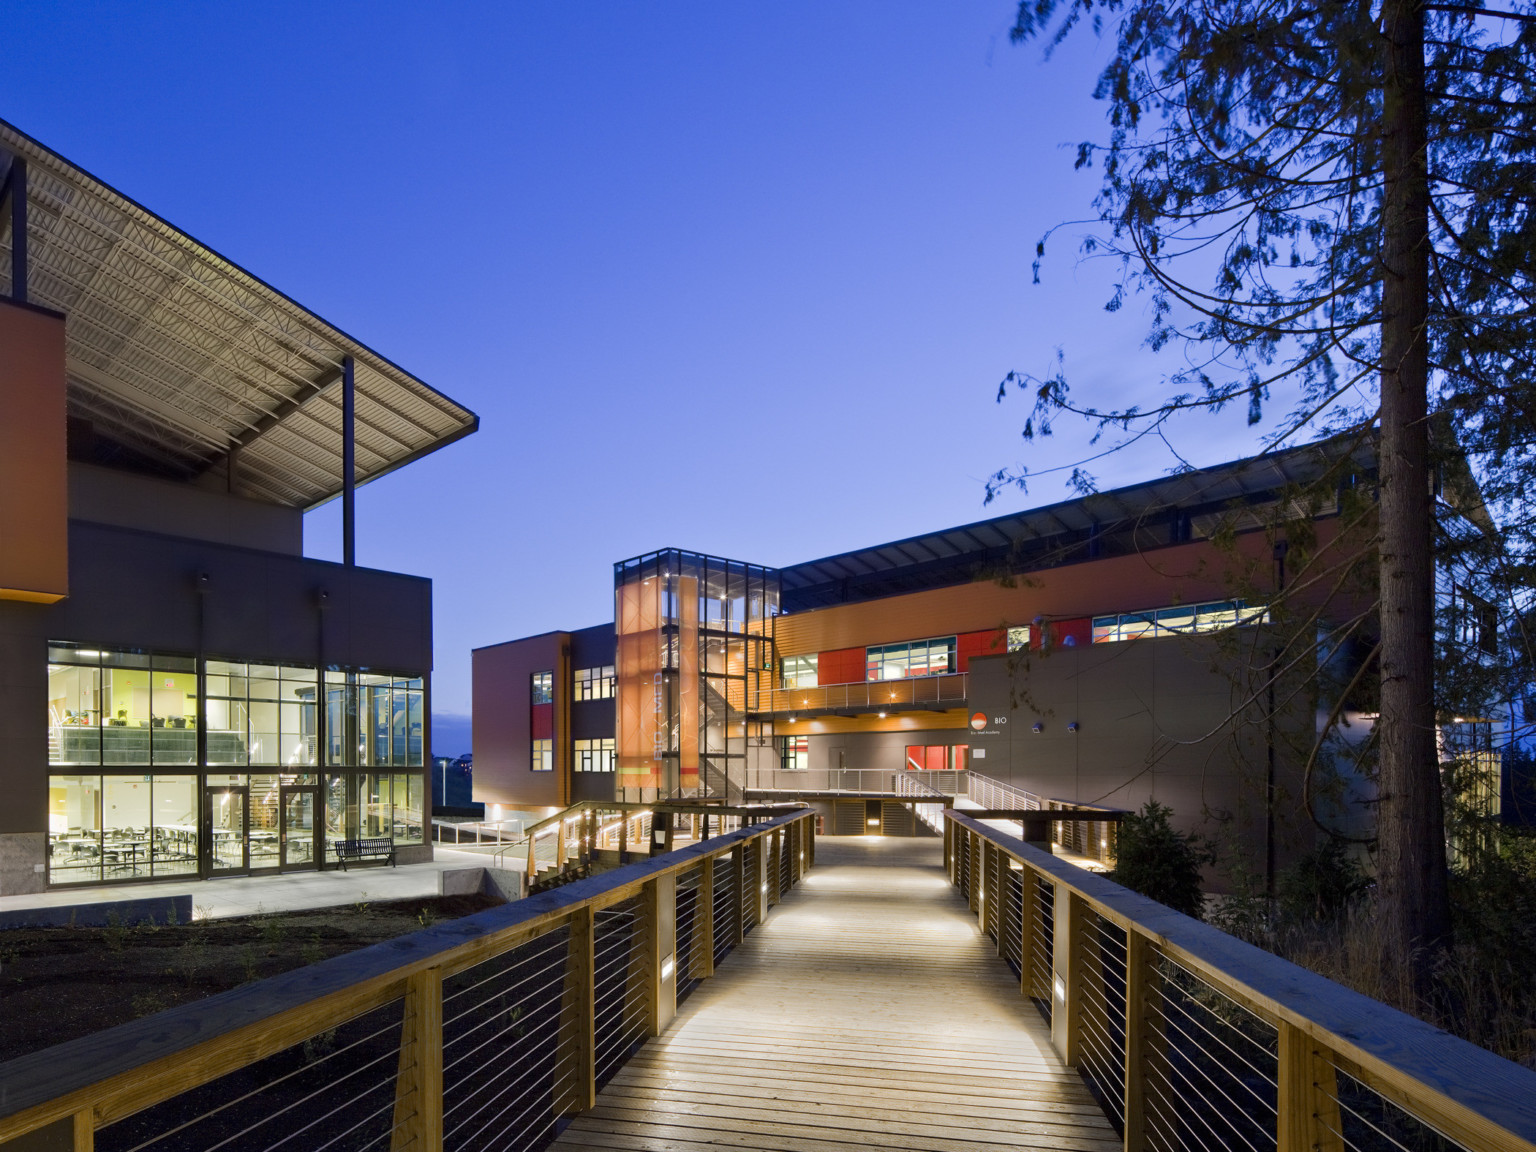 Marysville Getchell High School pedestrian bridge crosses to 2 buildings. Glass entrances and orange accents on each building